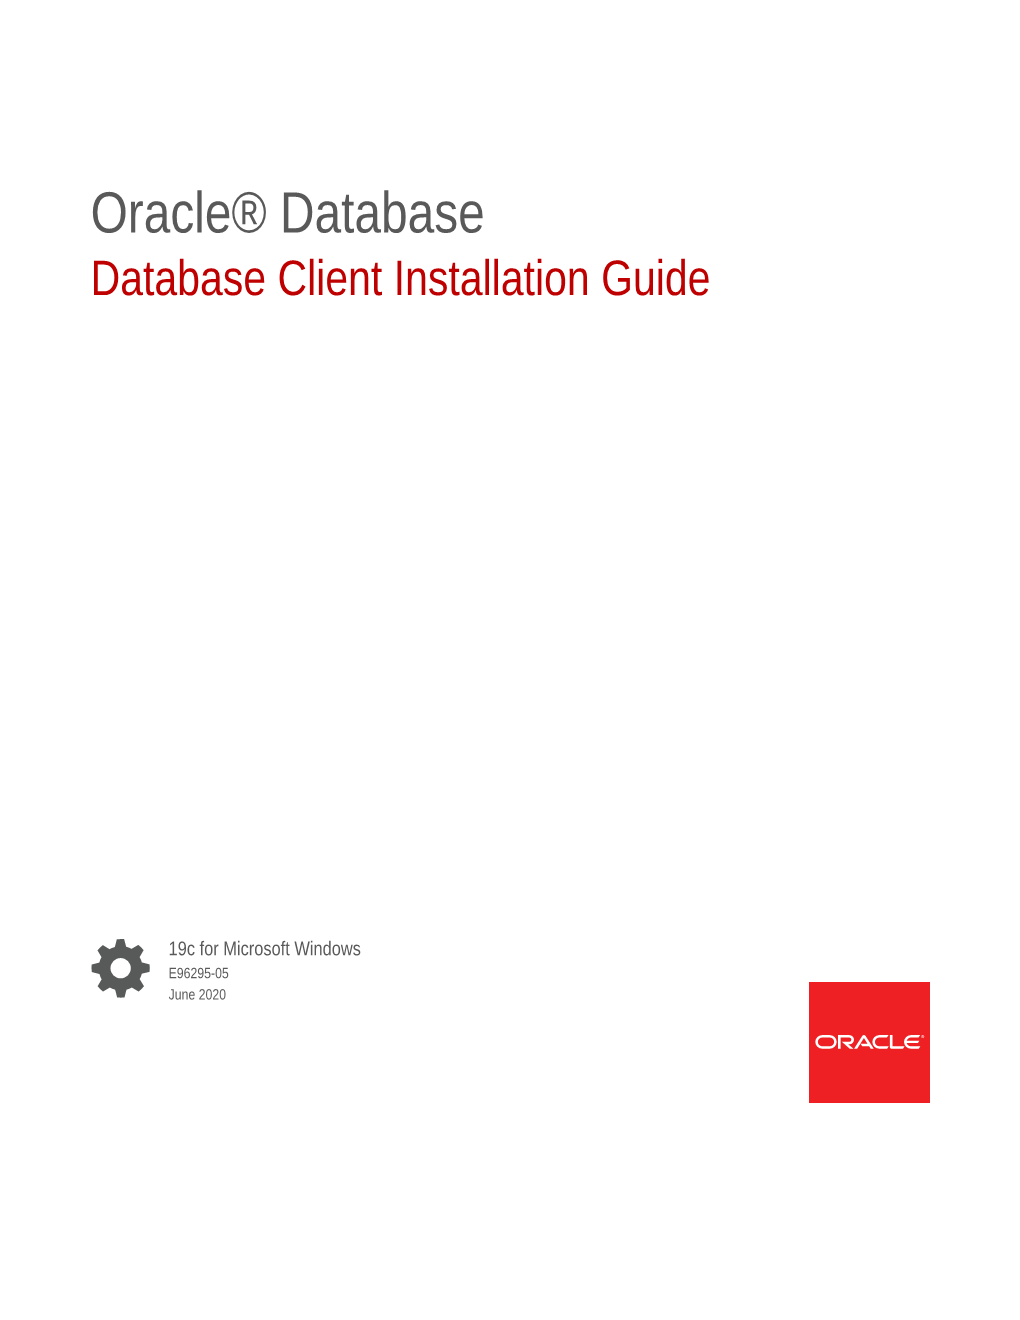 Database Client Installation Guide for Windows